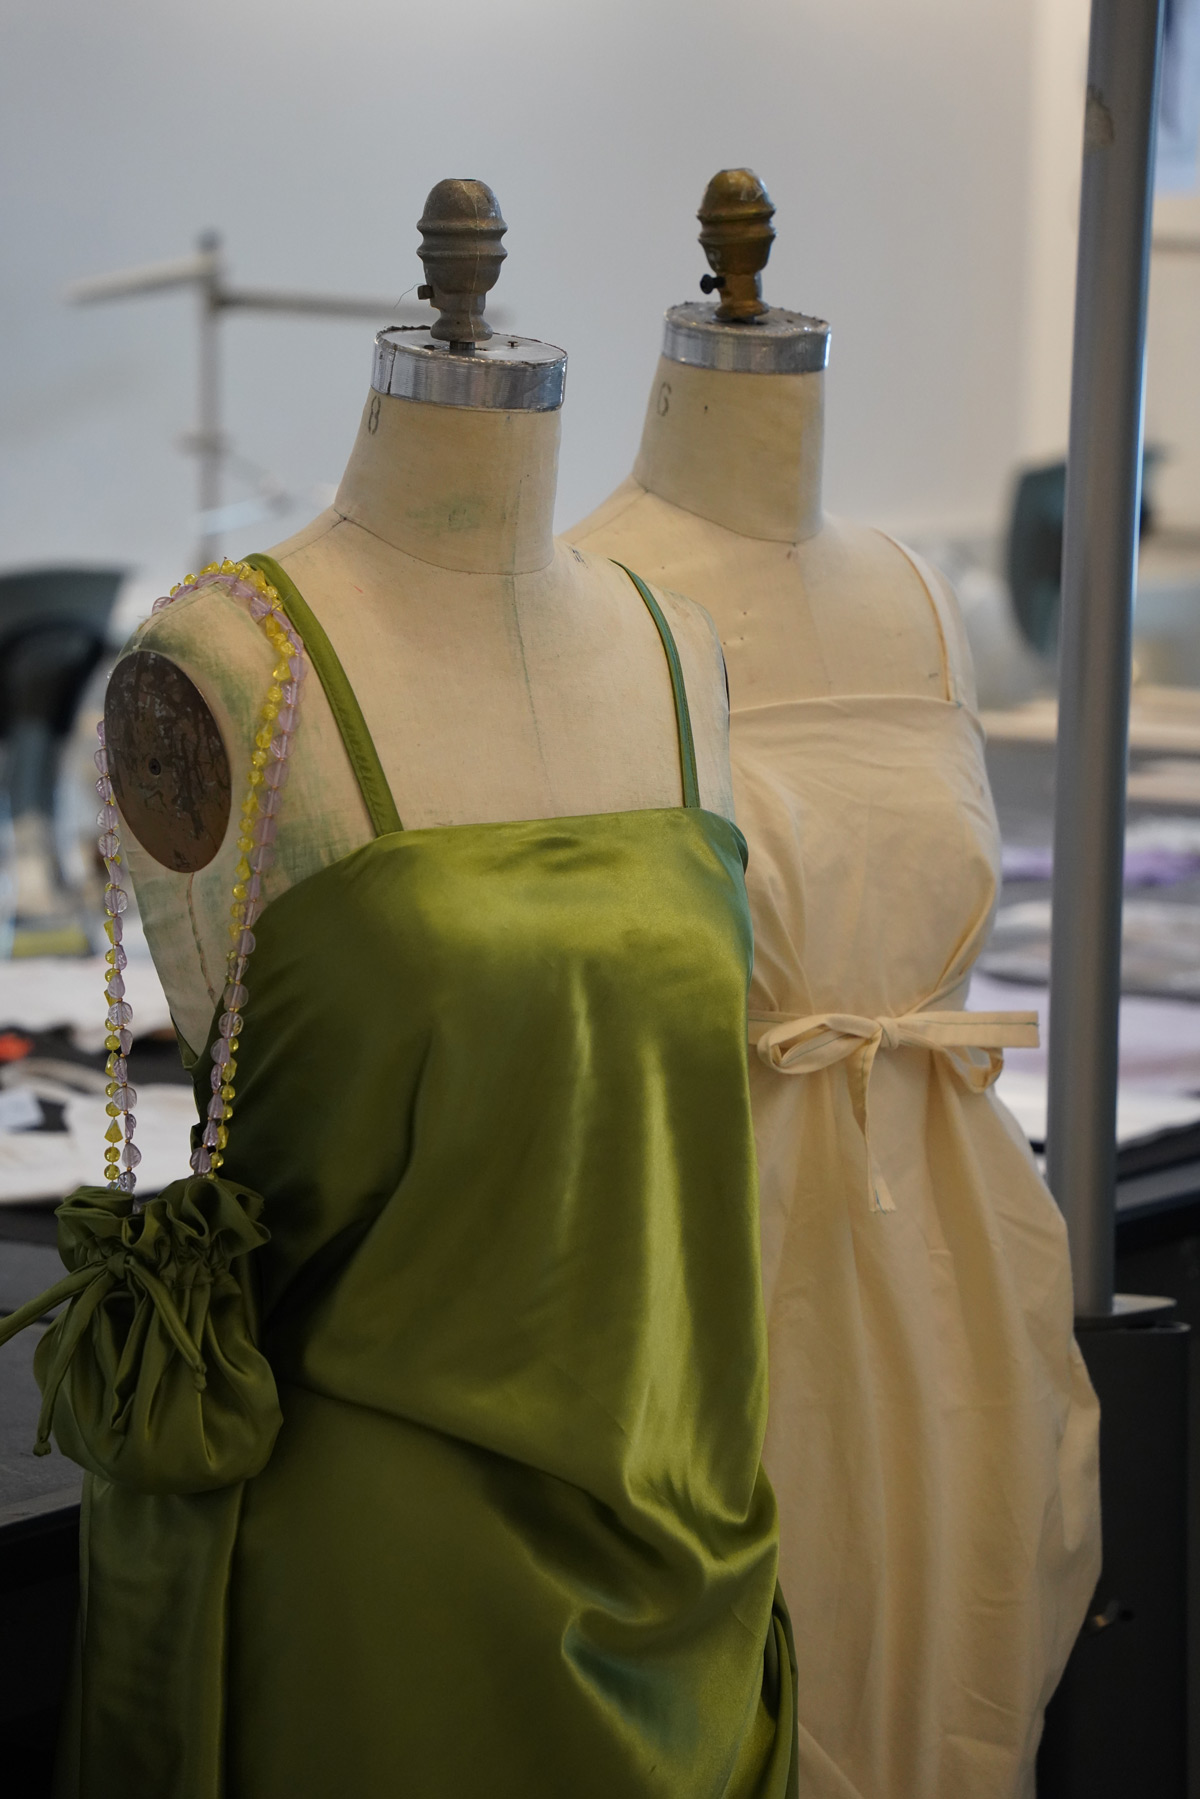 Fashion: Sewing and Construction